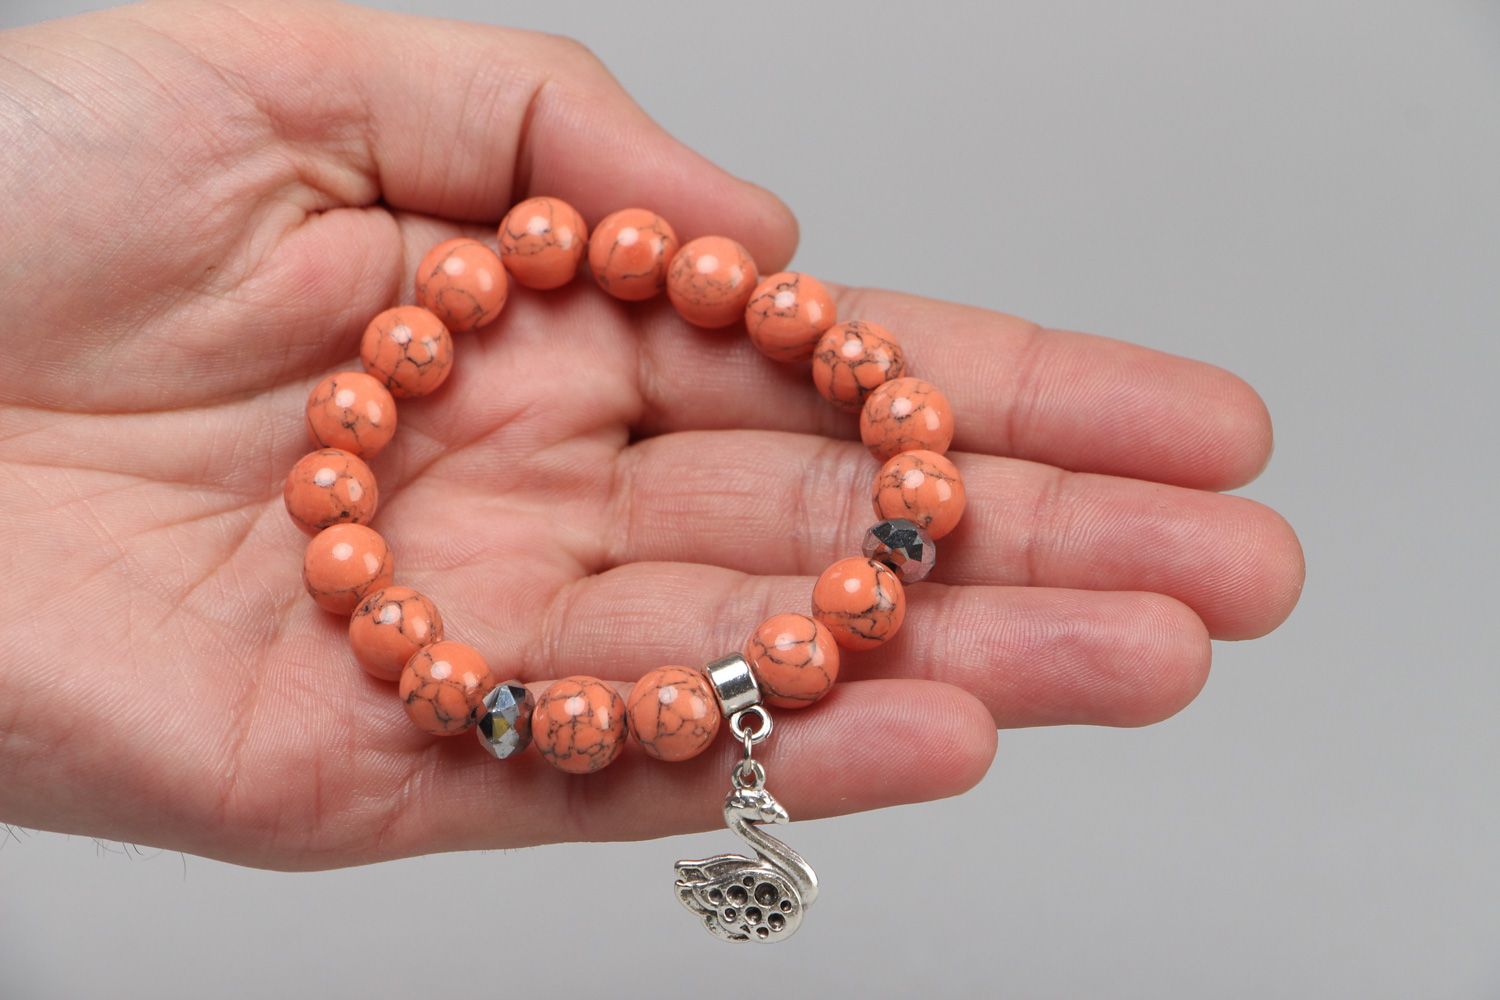 Handmade coral bracelet with metal charm in one turn photo 3